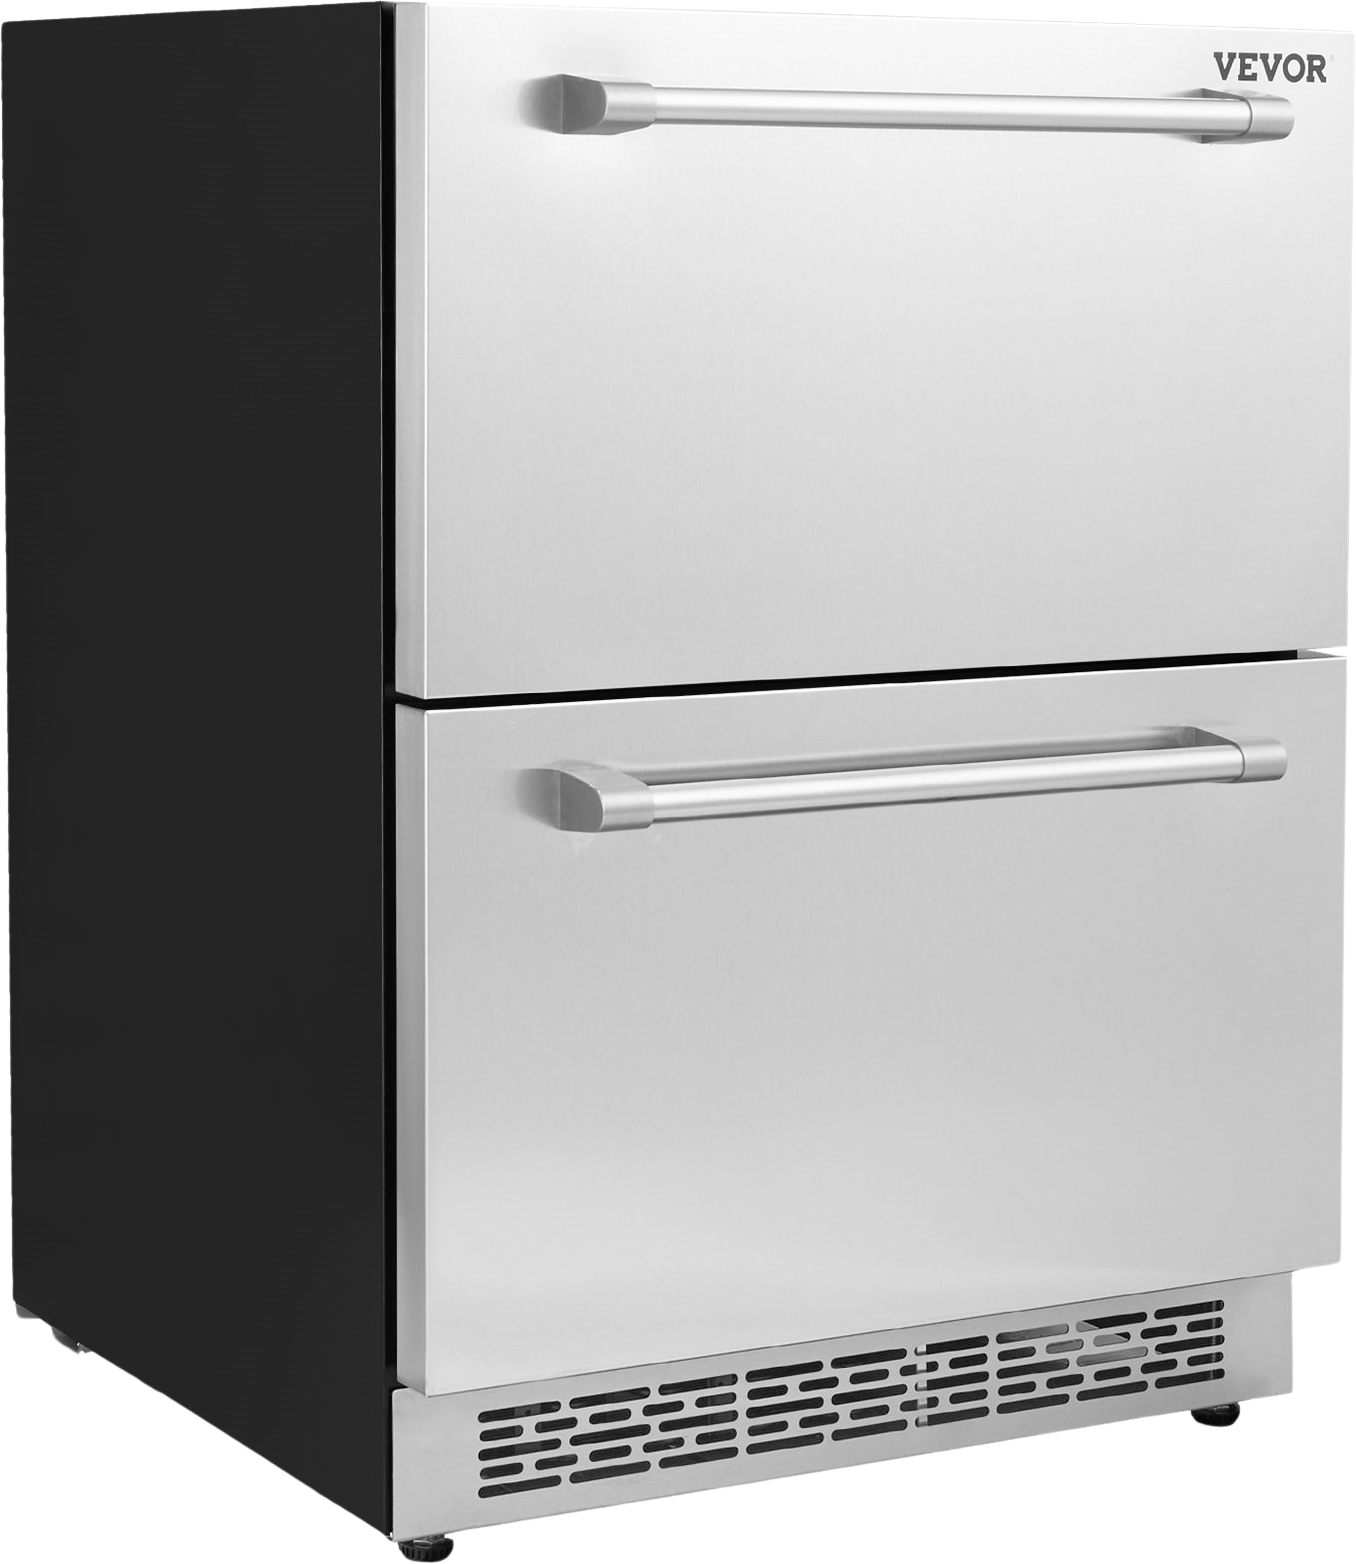 Vevor 24 inch Undercounter Refrigerator Double Drawer with Different Temperatures 4.87 Cu.Ft. Capacity New